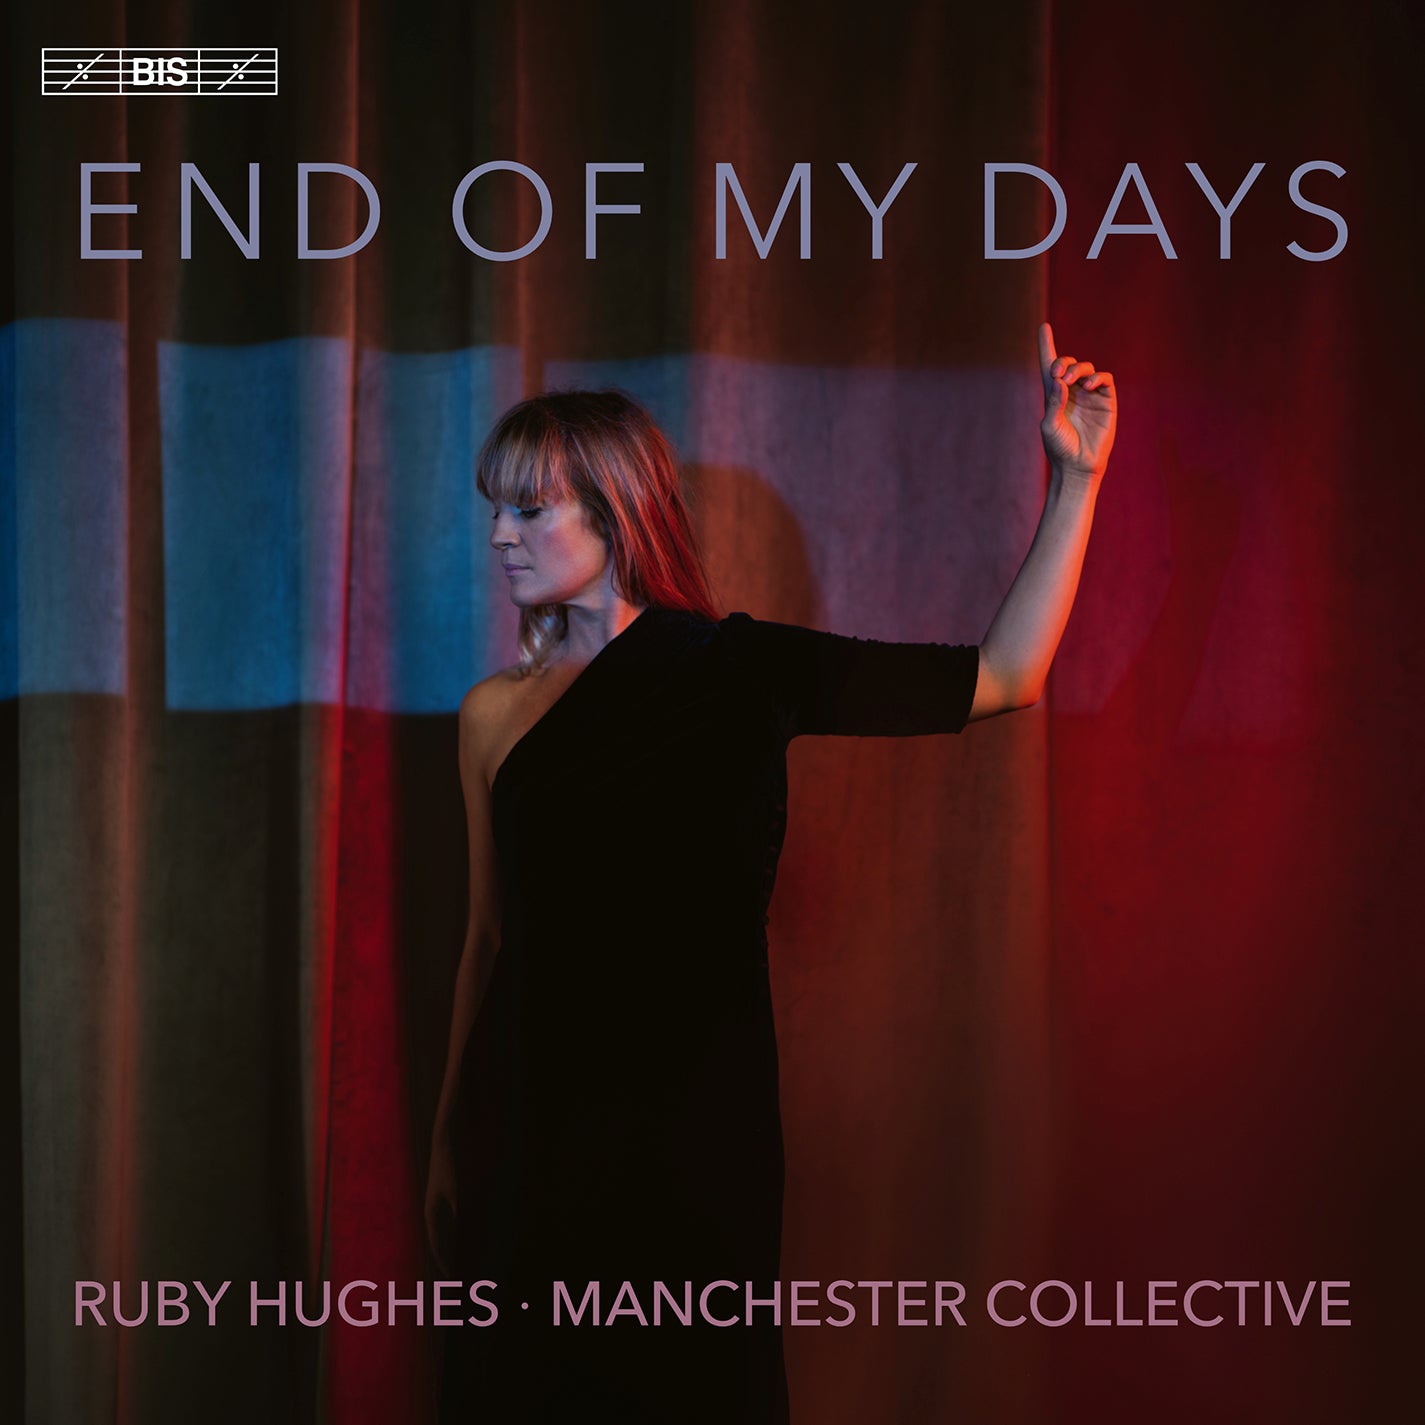 End of My Days / Hughes, Manchester Collective